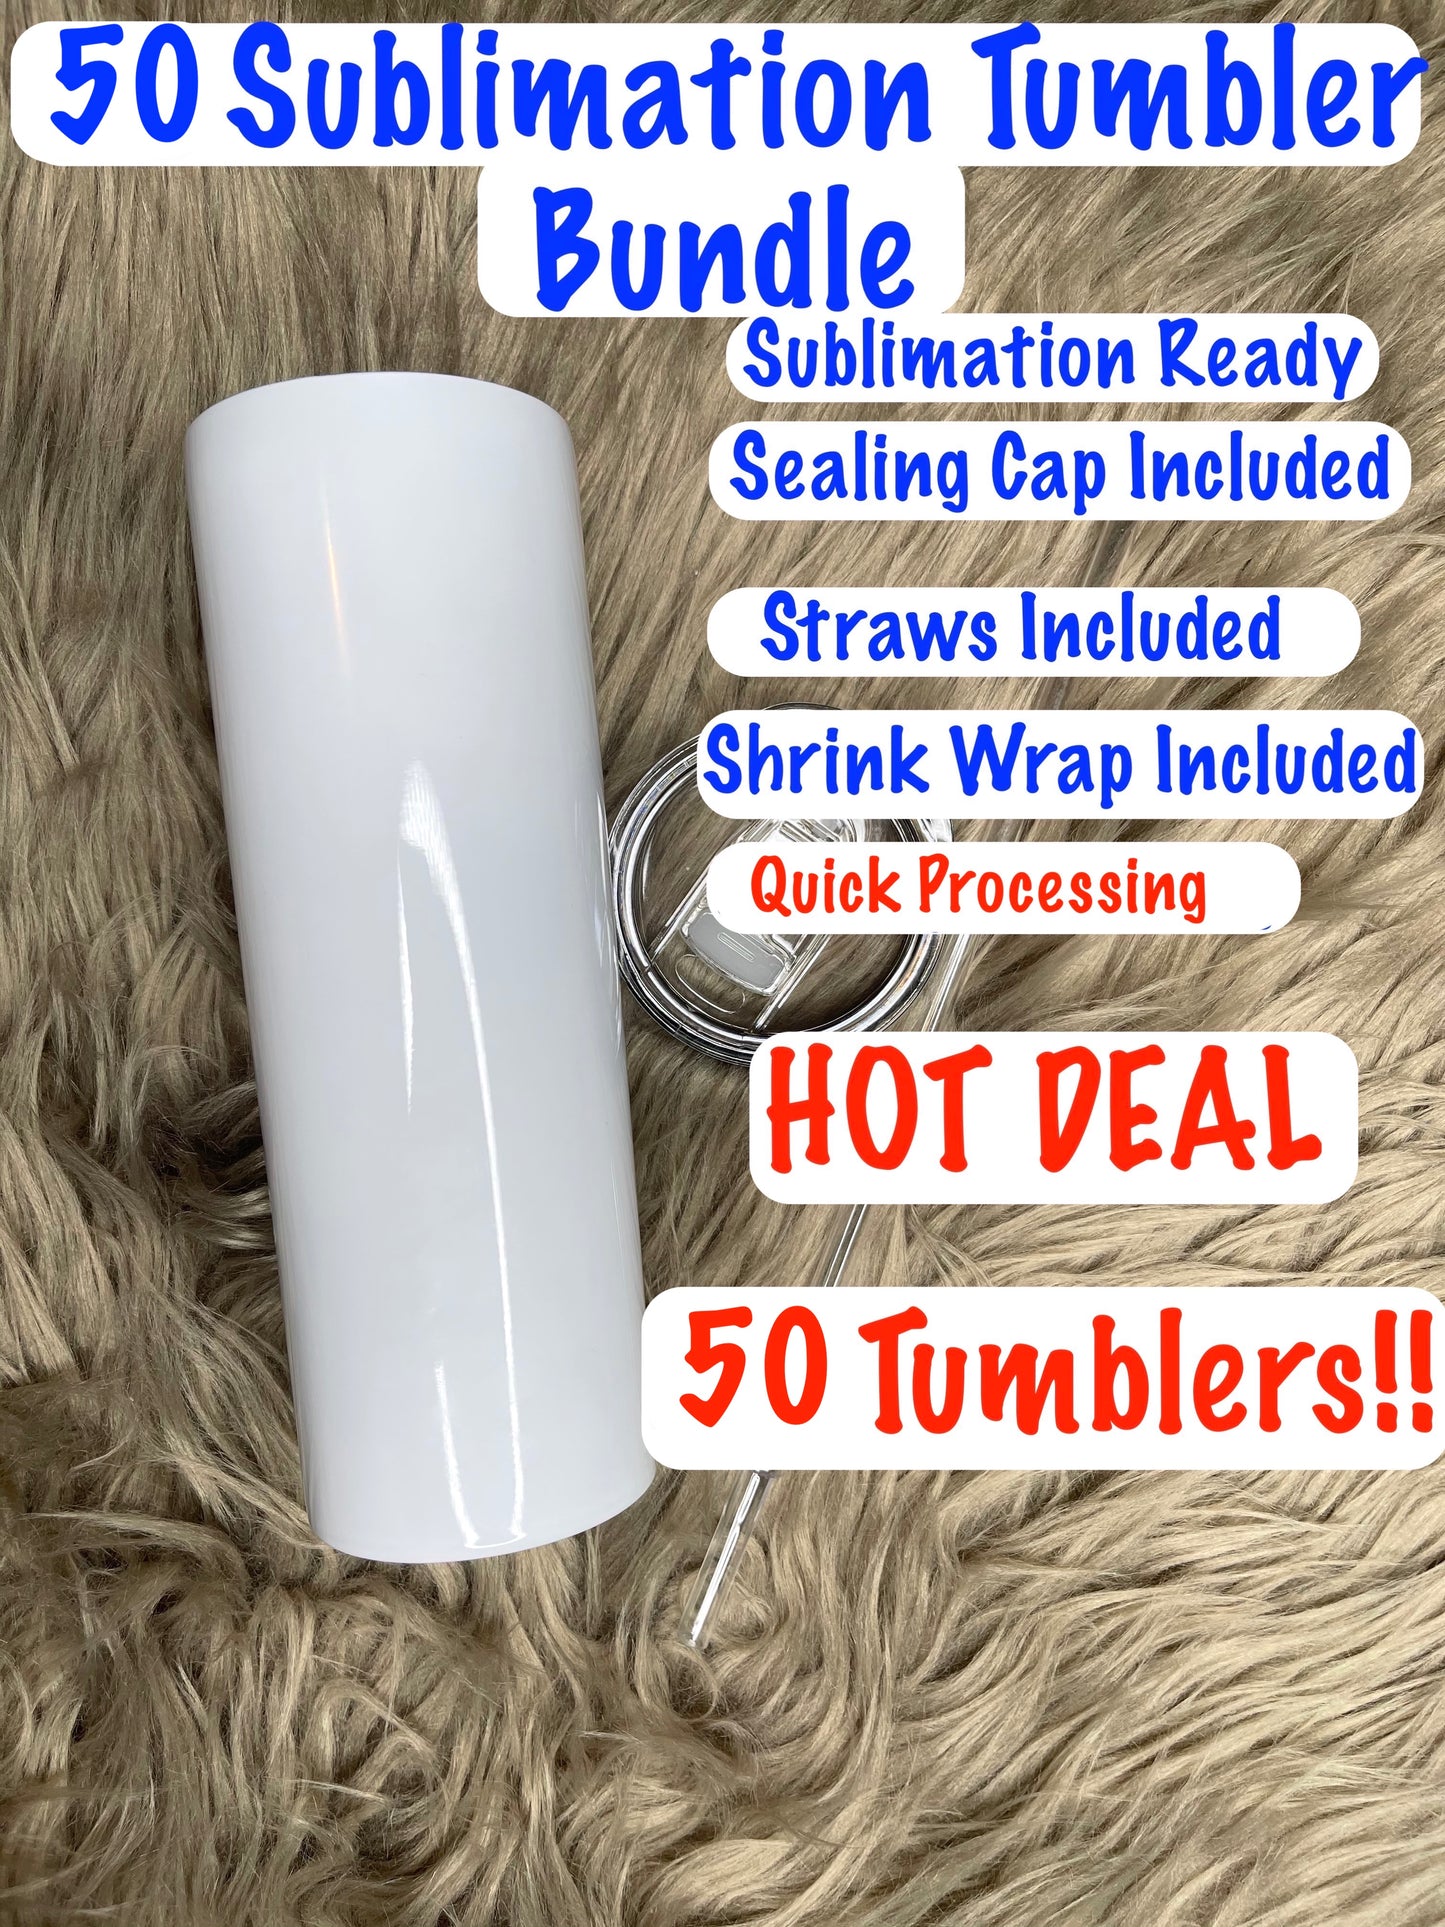 50 Pack of 20 oz Sublimation Tumbler 50 pack of tumblers | Sublimation Blanks Bulk | COMPLETELY STRAIGHT tumblers